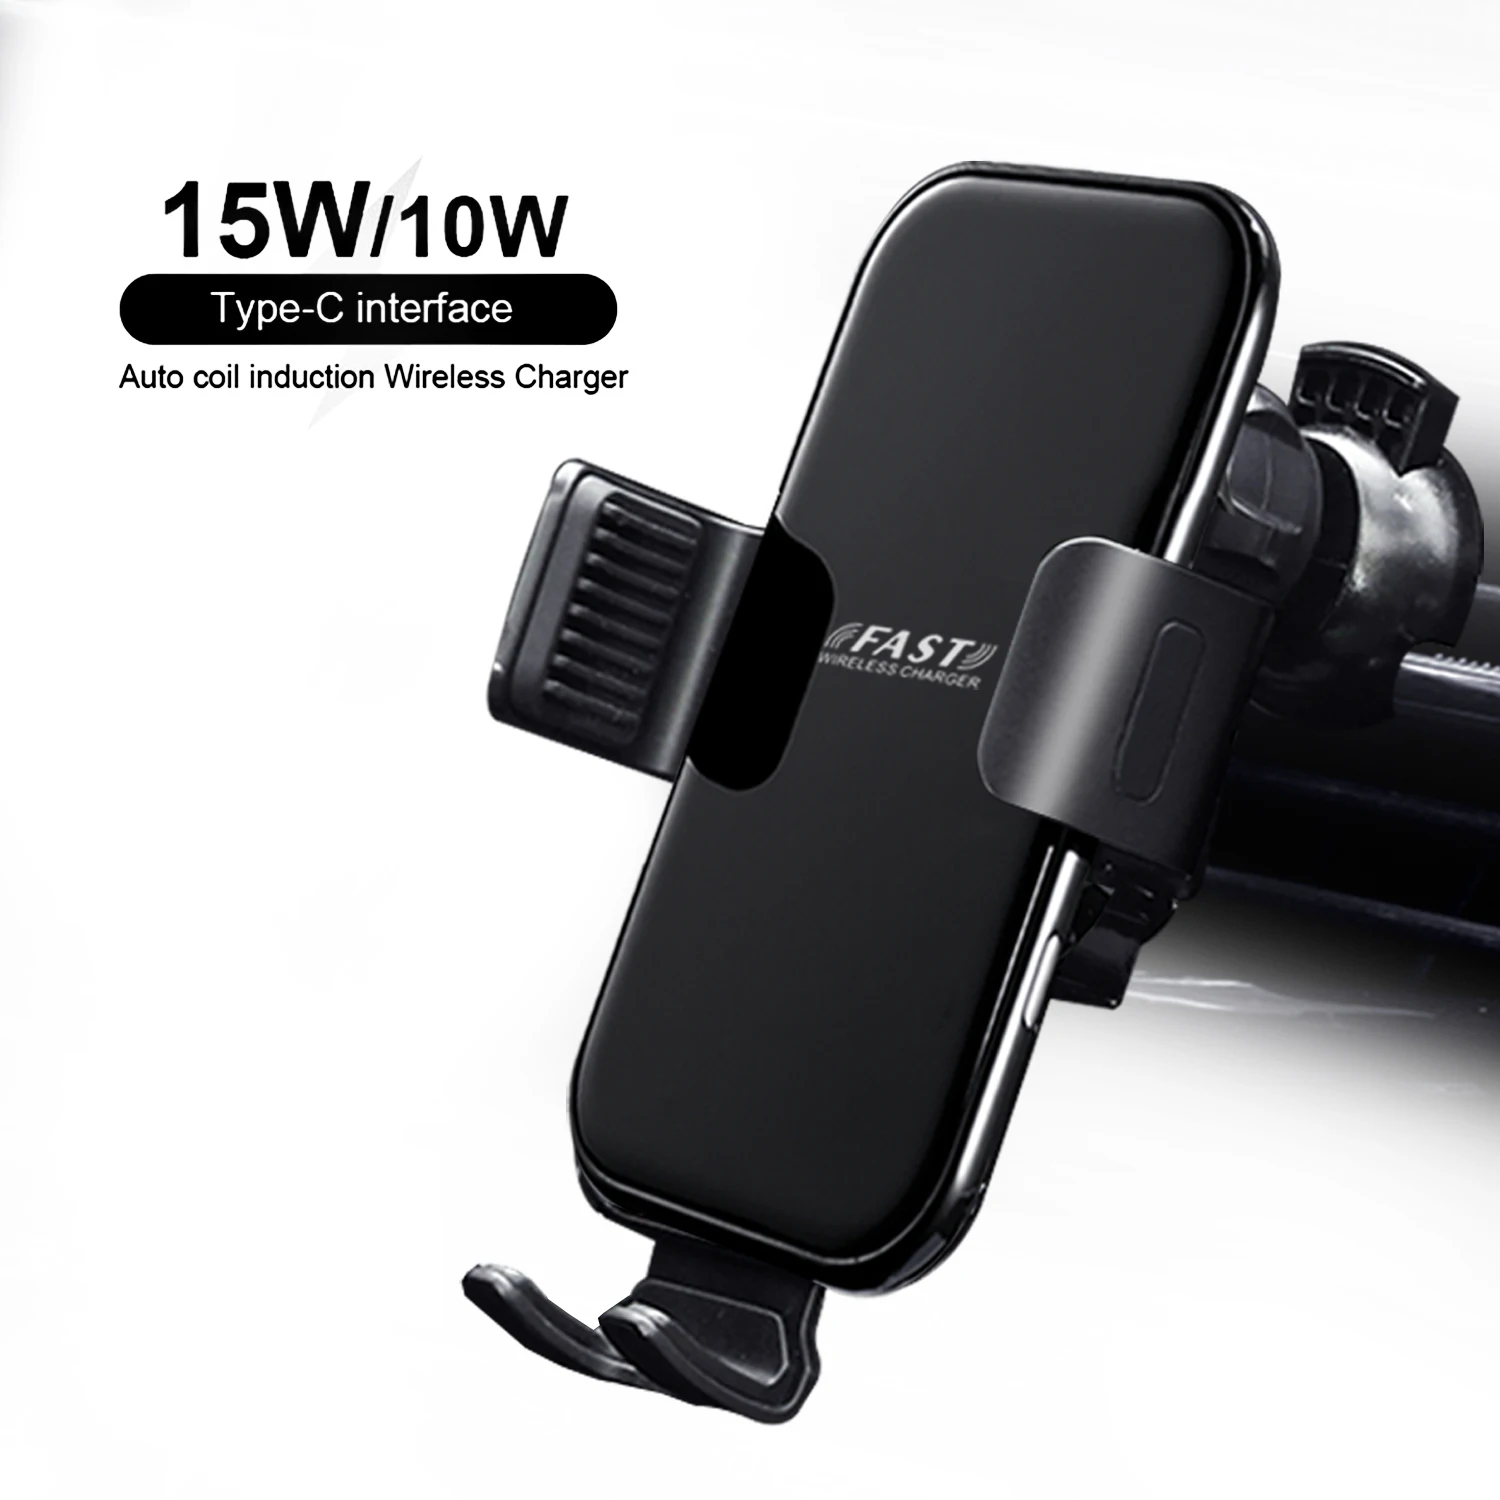 

Universal FOD smart automatic clamp QI 10W 15W car air vent clip stand mobile fast holder charger wireless phone charger